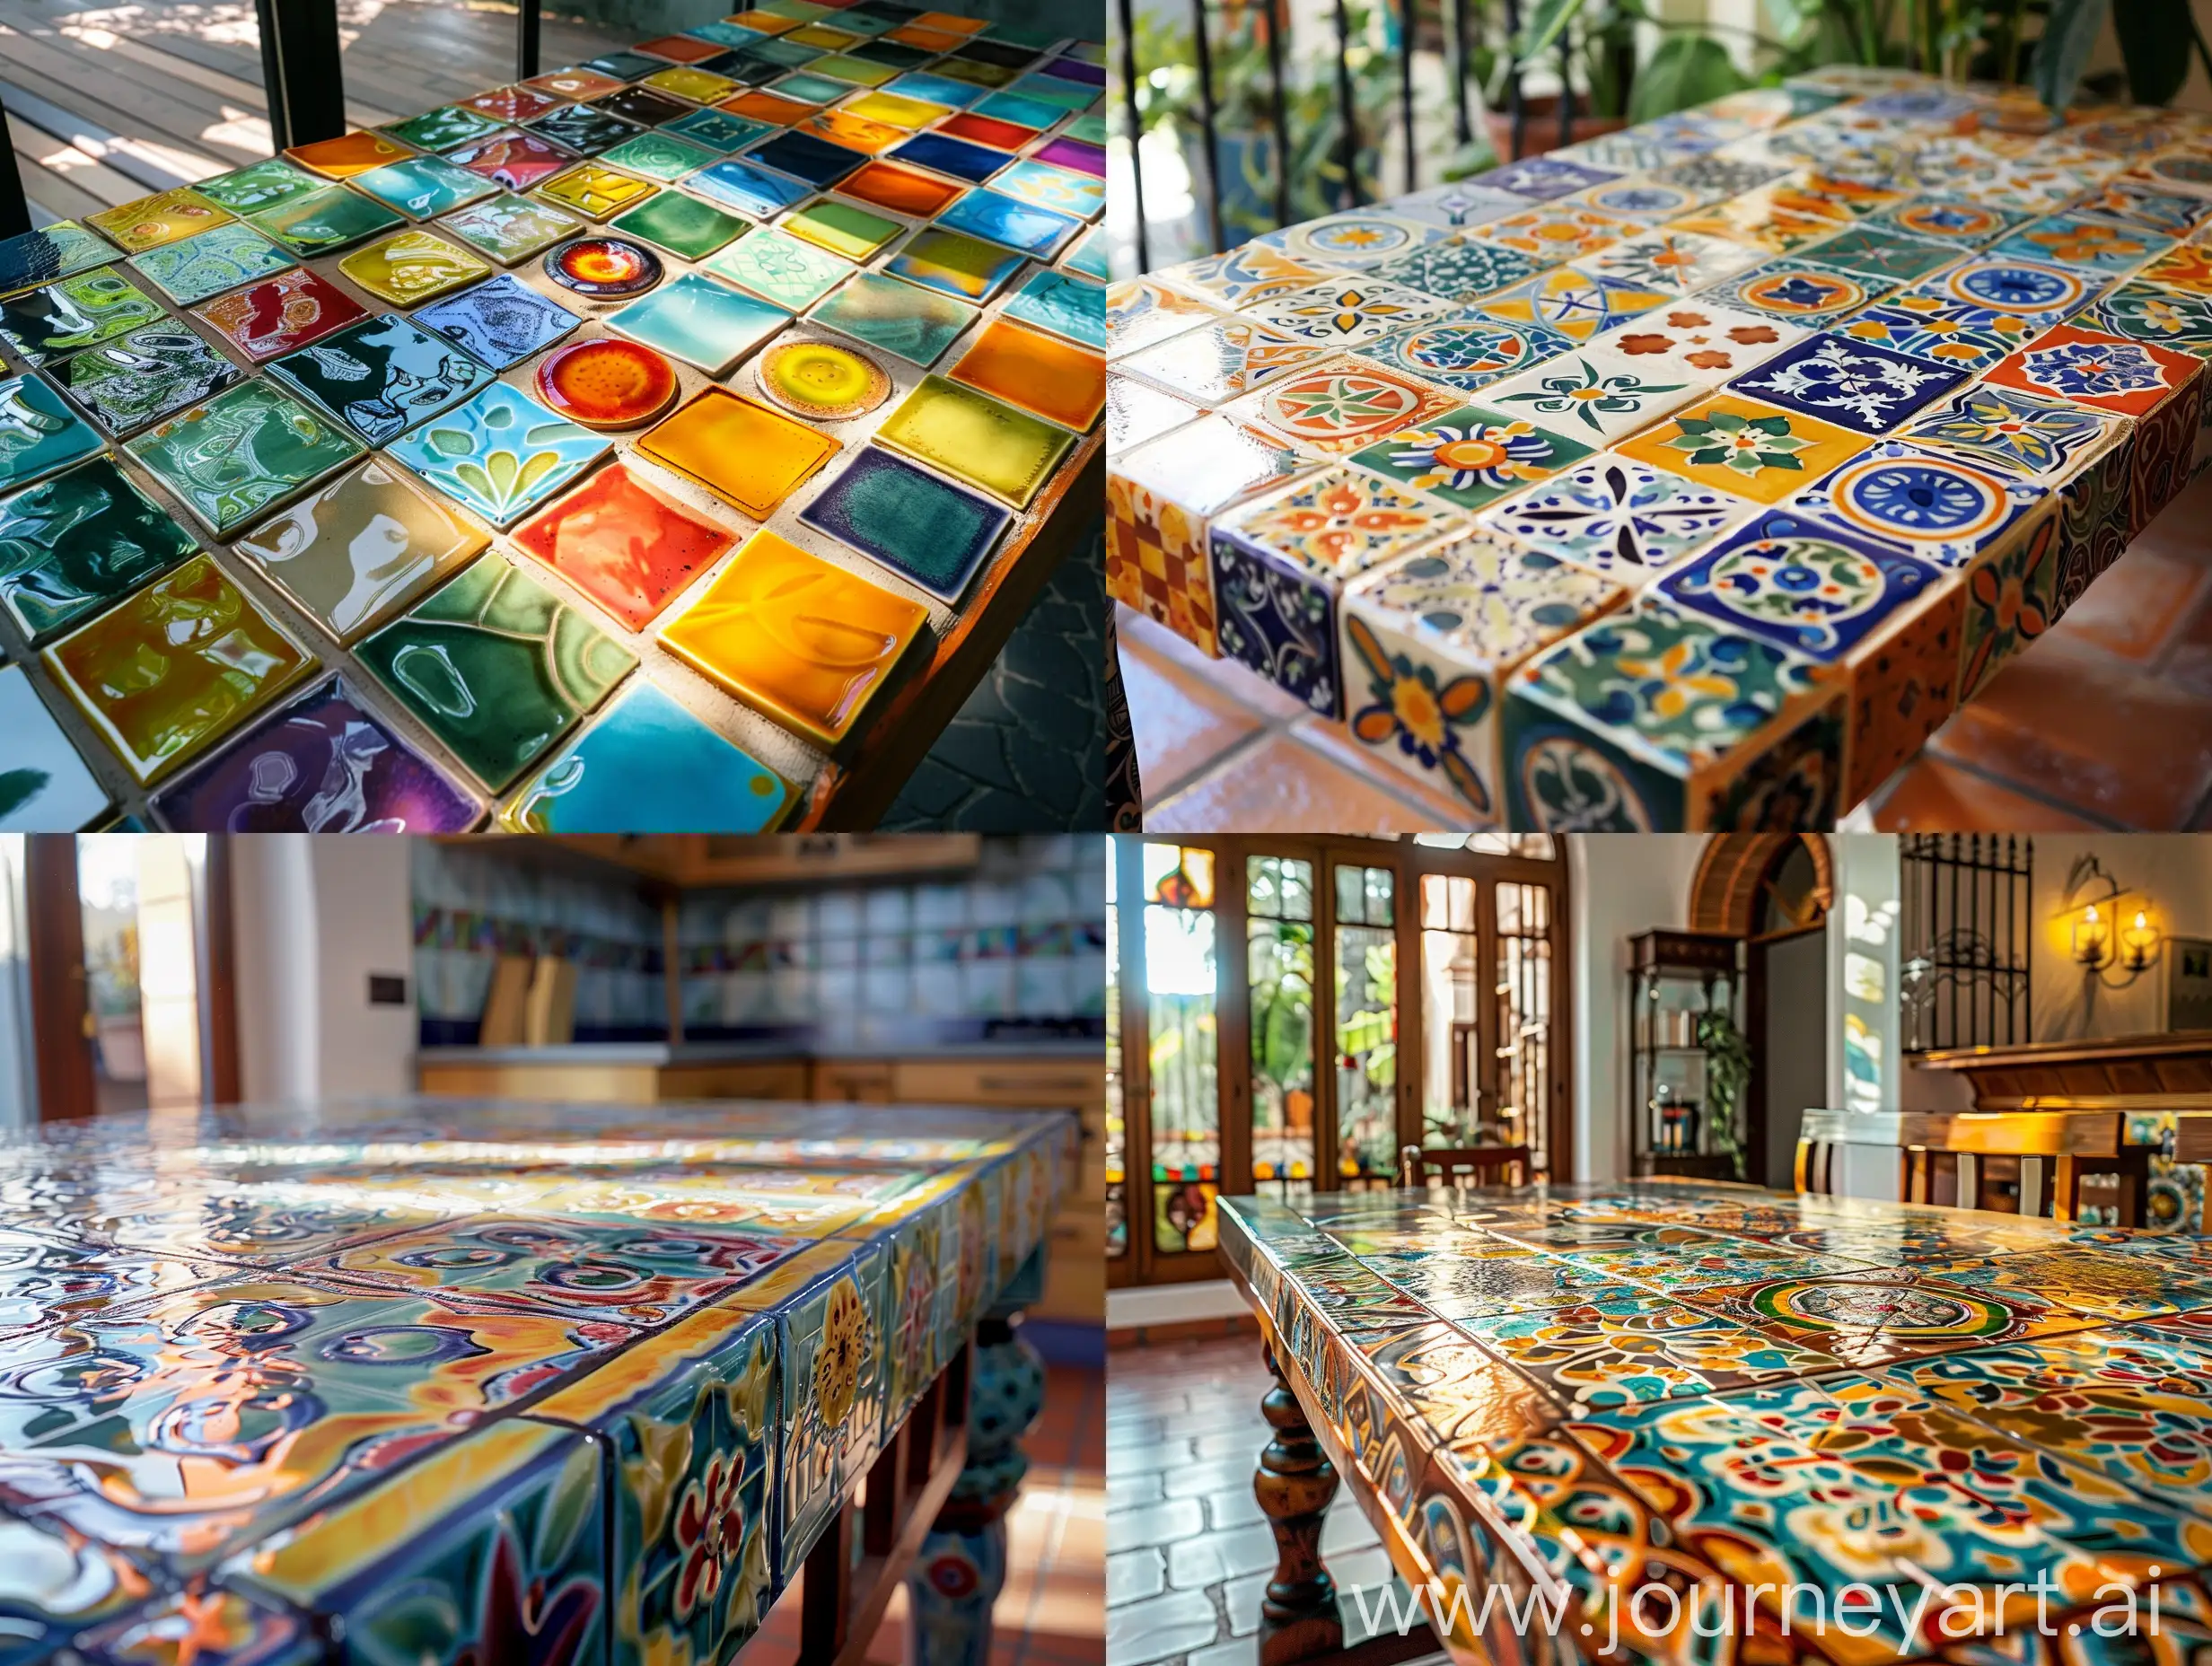 Colorful-Ceramic-Tile-Table-in-Art-Nouveau-Style-with-Natural-Lighting